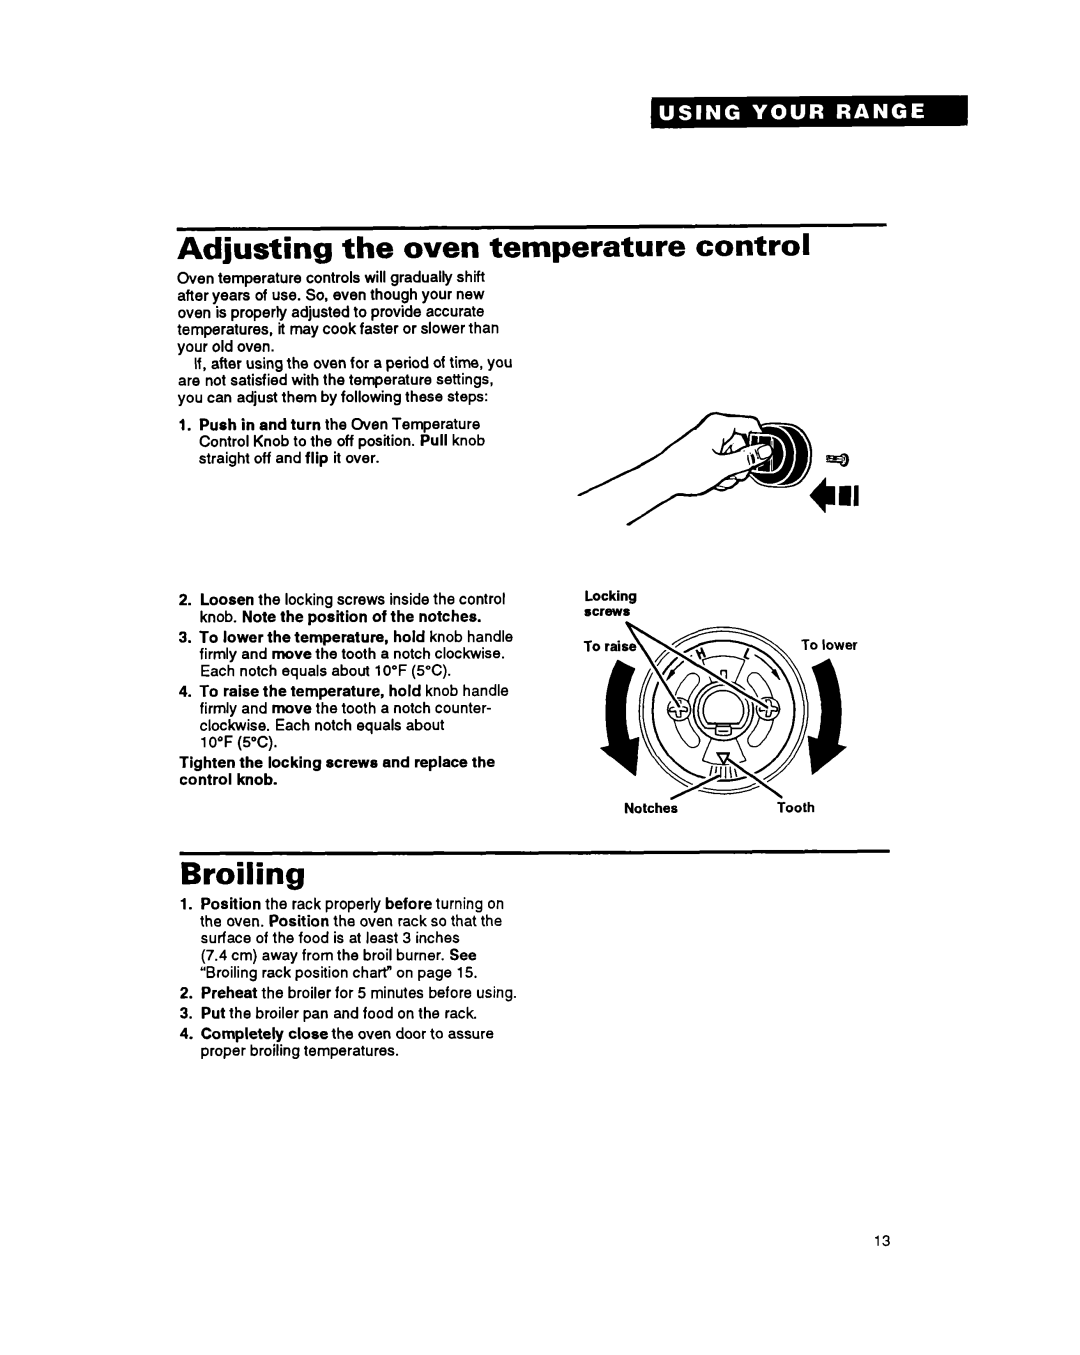 Whirlpool FGS387Y manual Adjusting the oven temperature control, Broiling 